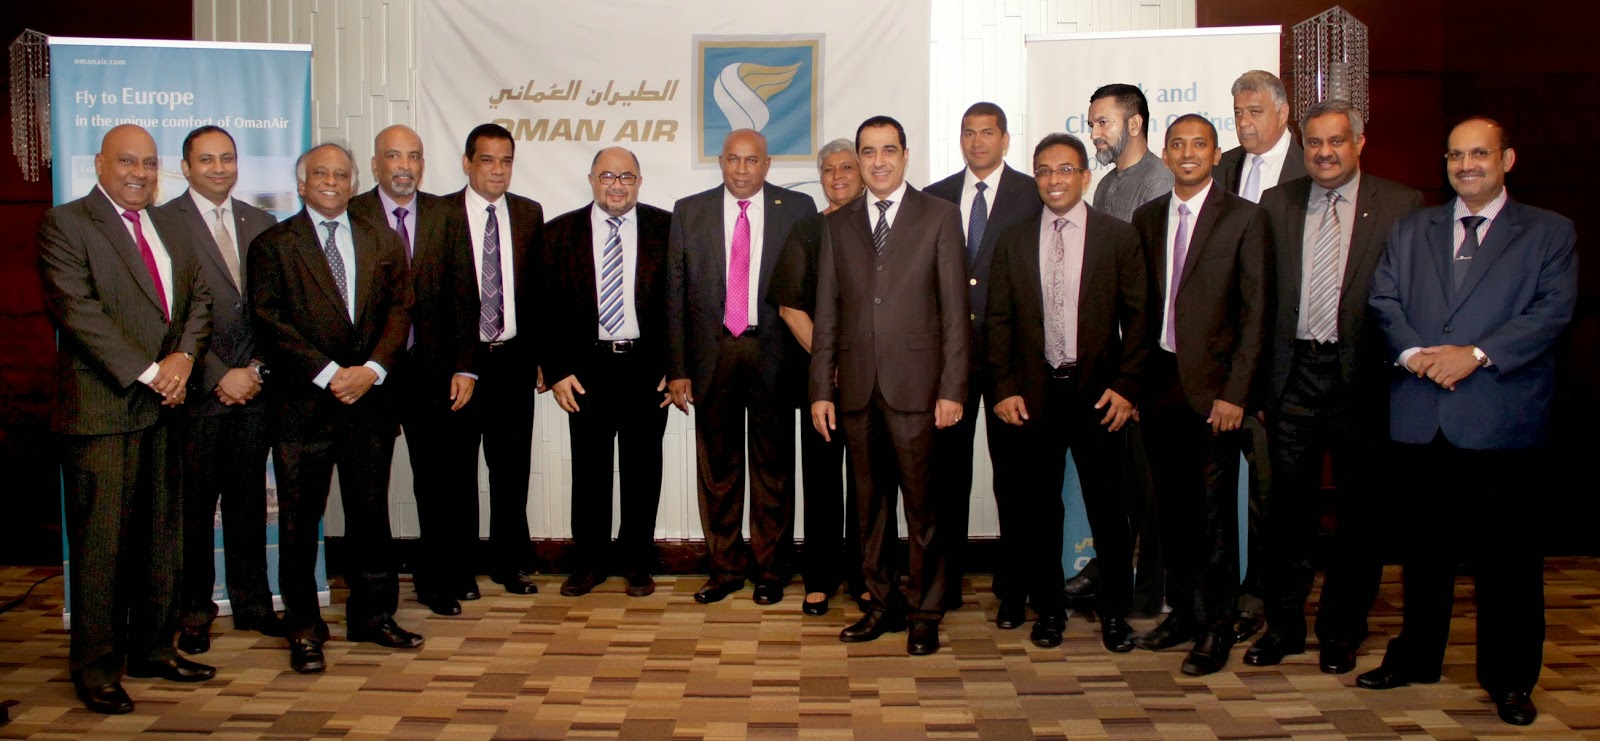 Abdulrahaman Al-Busaidy - Chief Operating Officer, Abdulrazaq bin Juma Alraisi - Chief Commercial Officer, Senior Managers from HDQ, Gihan Karunaratne - Country Manager - Sri Lanka & Maldives with the top performing Sri Lankan agents and the management team of the General Sales Agents.